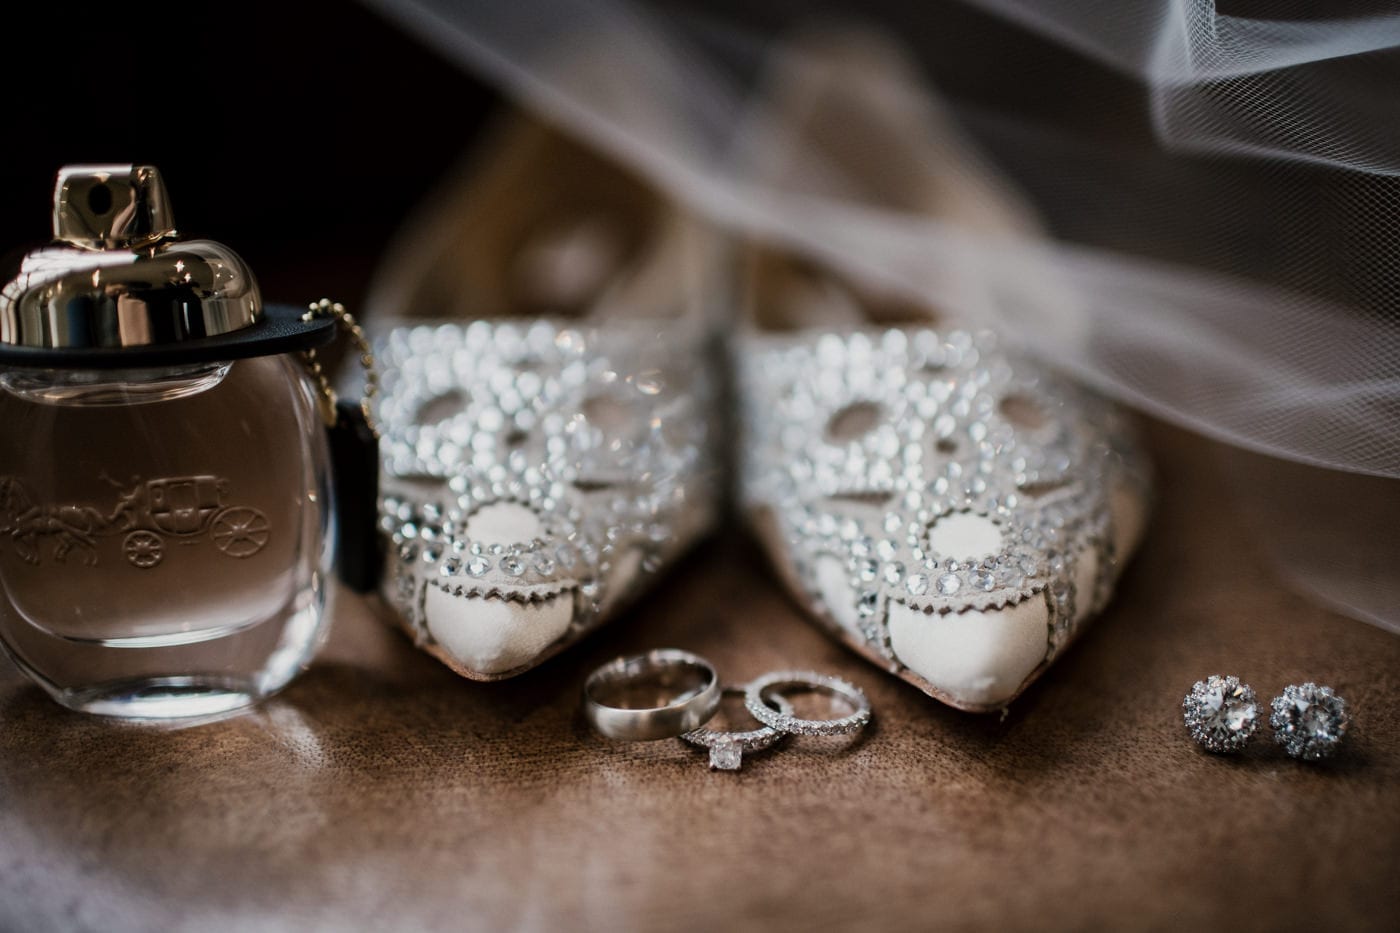 brides beaded shoes wedding bands and earrings at black tie winter wedding